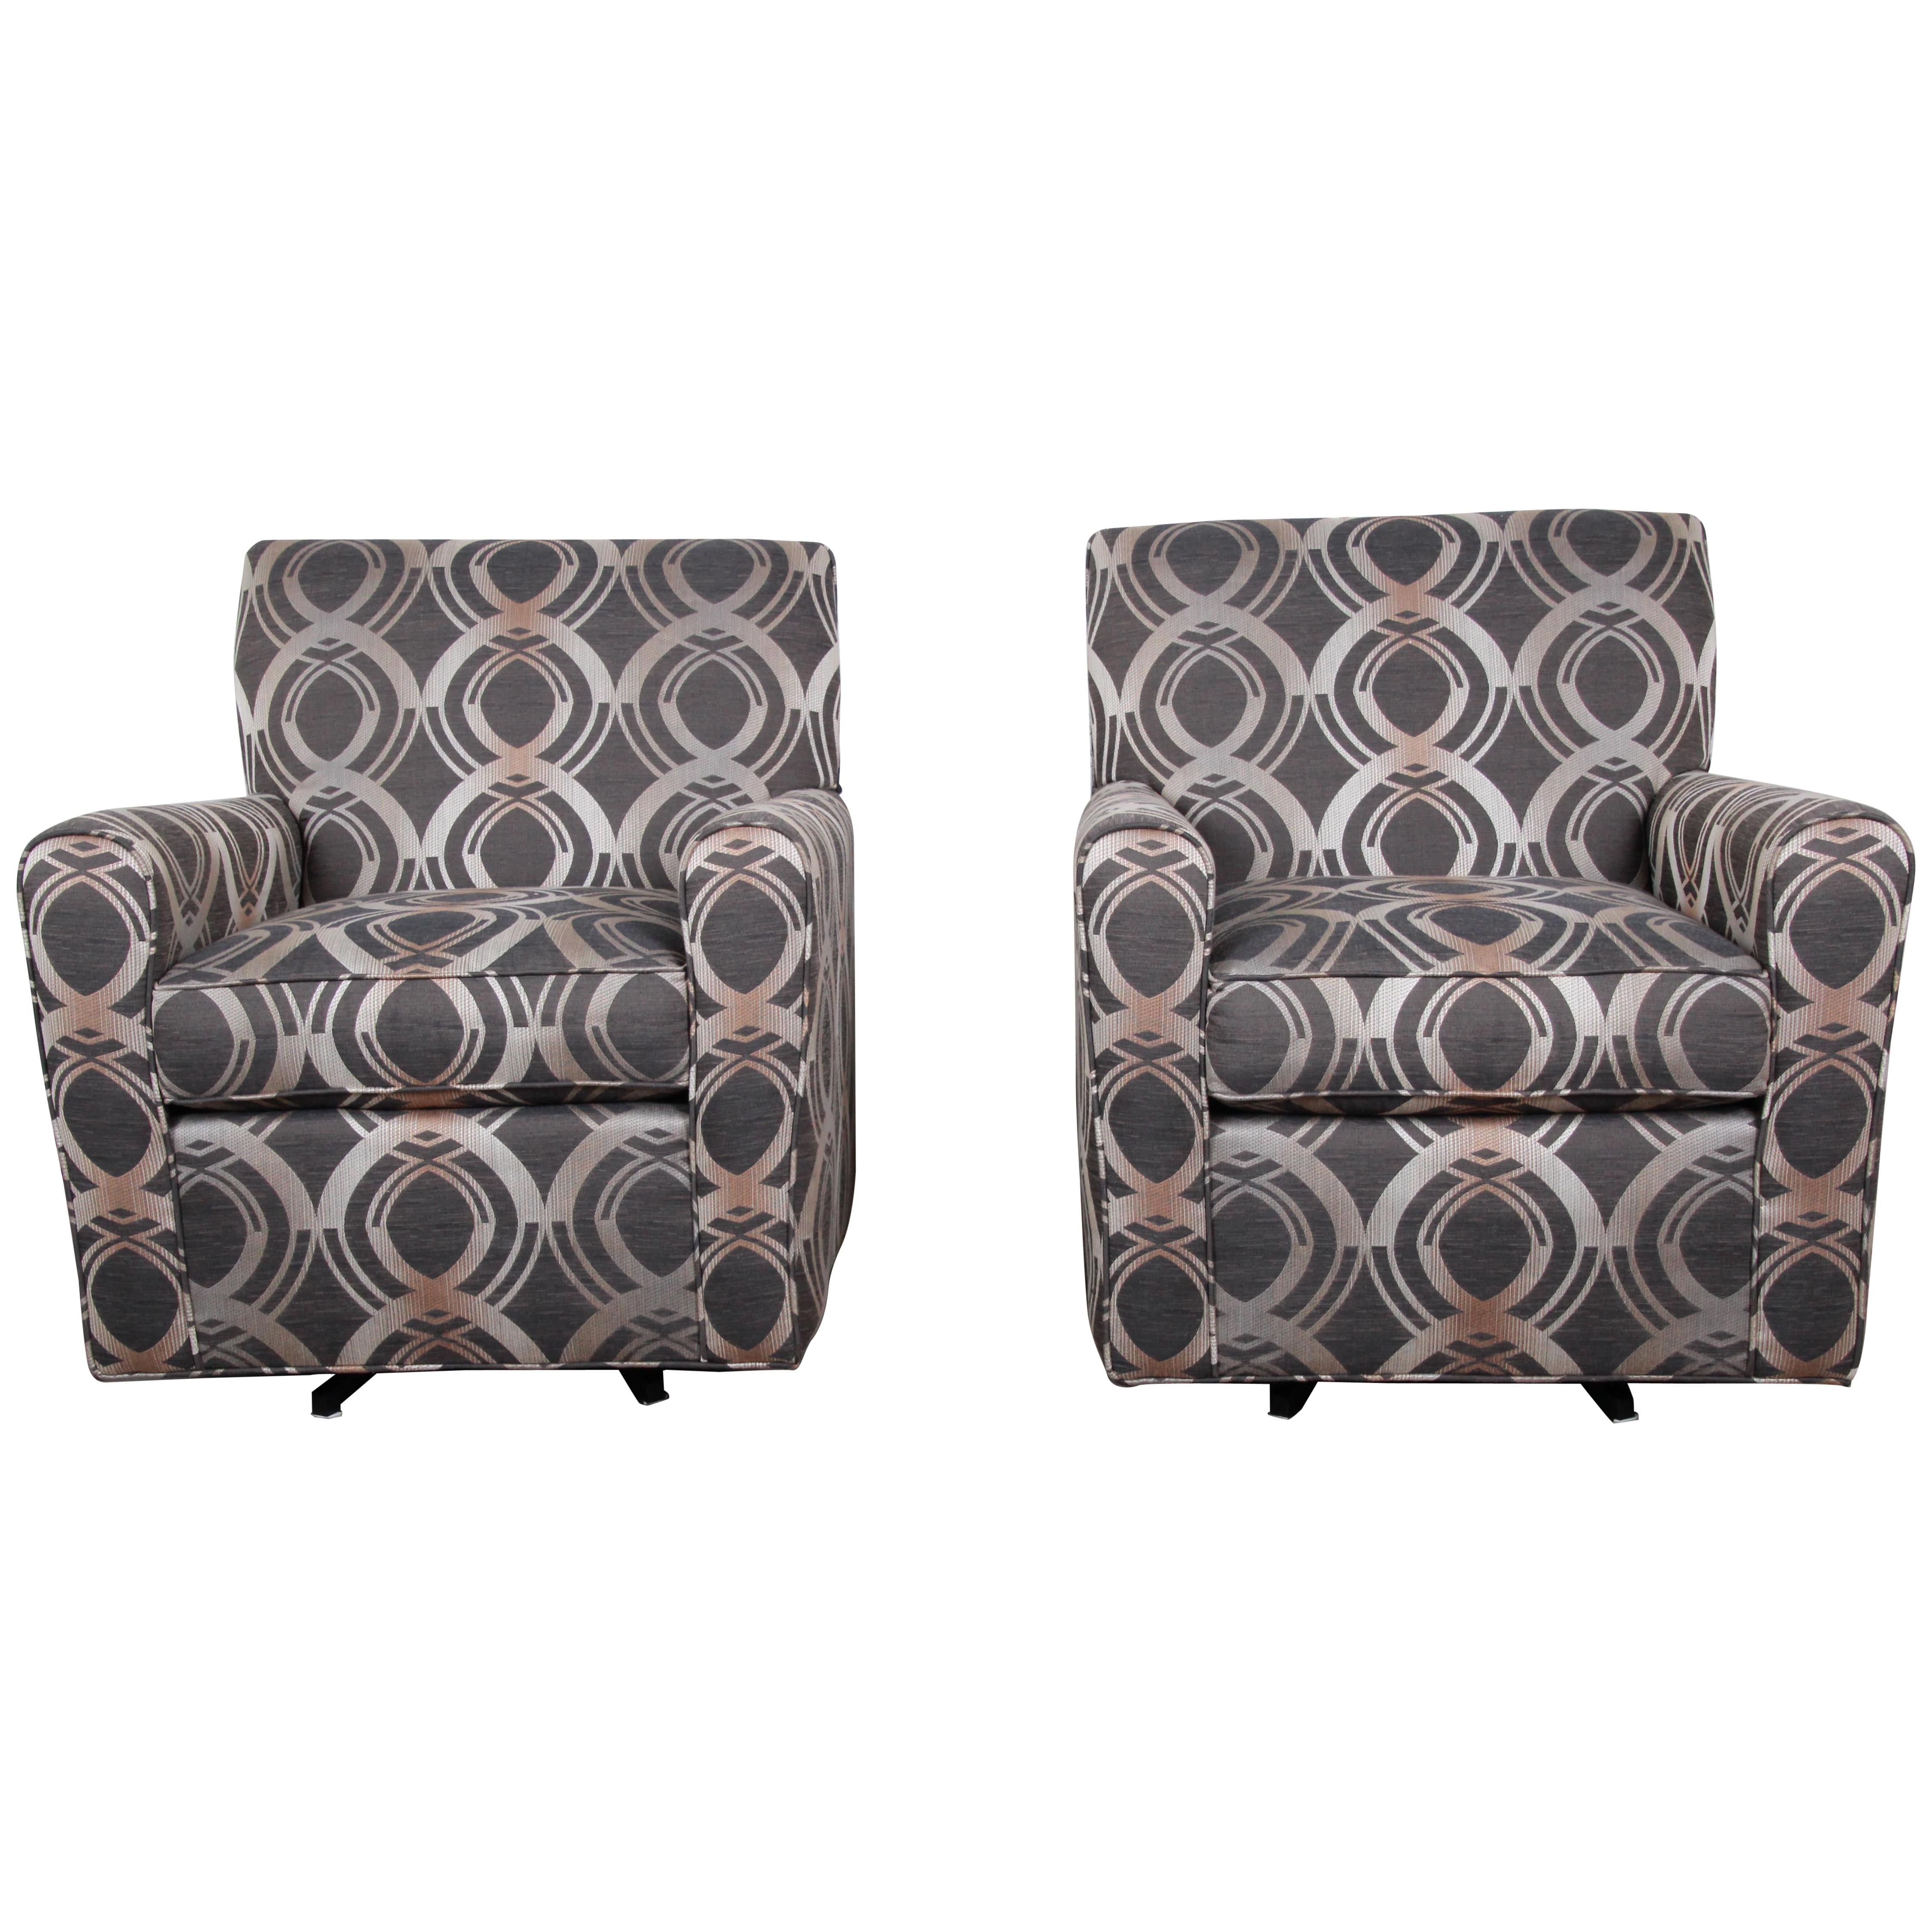 Contemporary Upholstered Swivel Lounge Chairs by Craftmaster, Pair